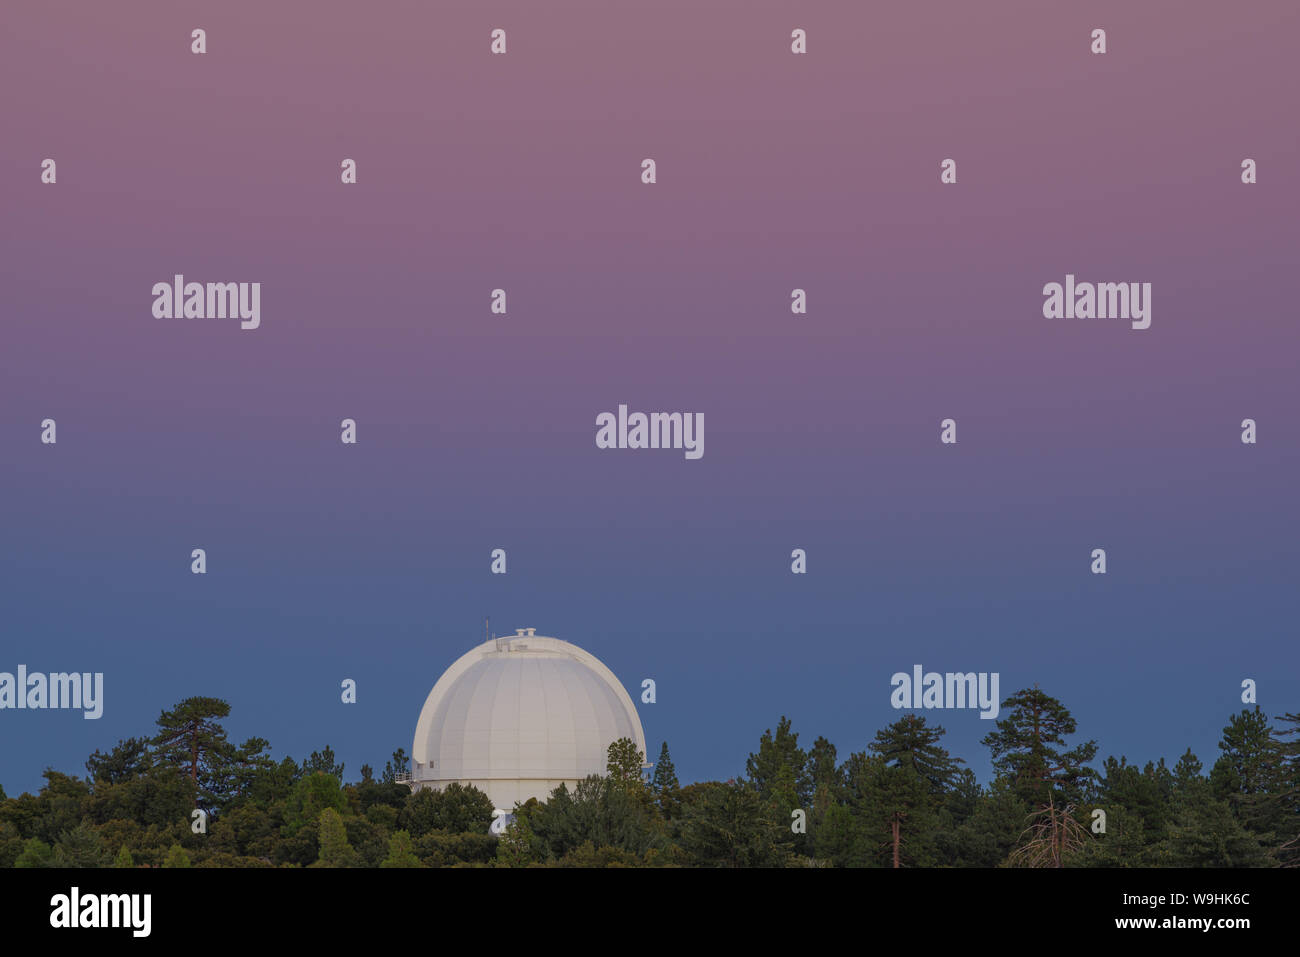 Image taken during the blue hour at Mt Wilson in California showing  an observatory dome. Stock Photo